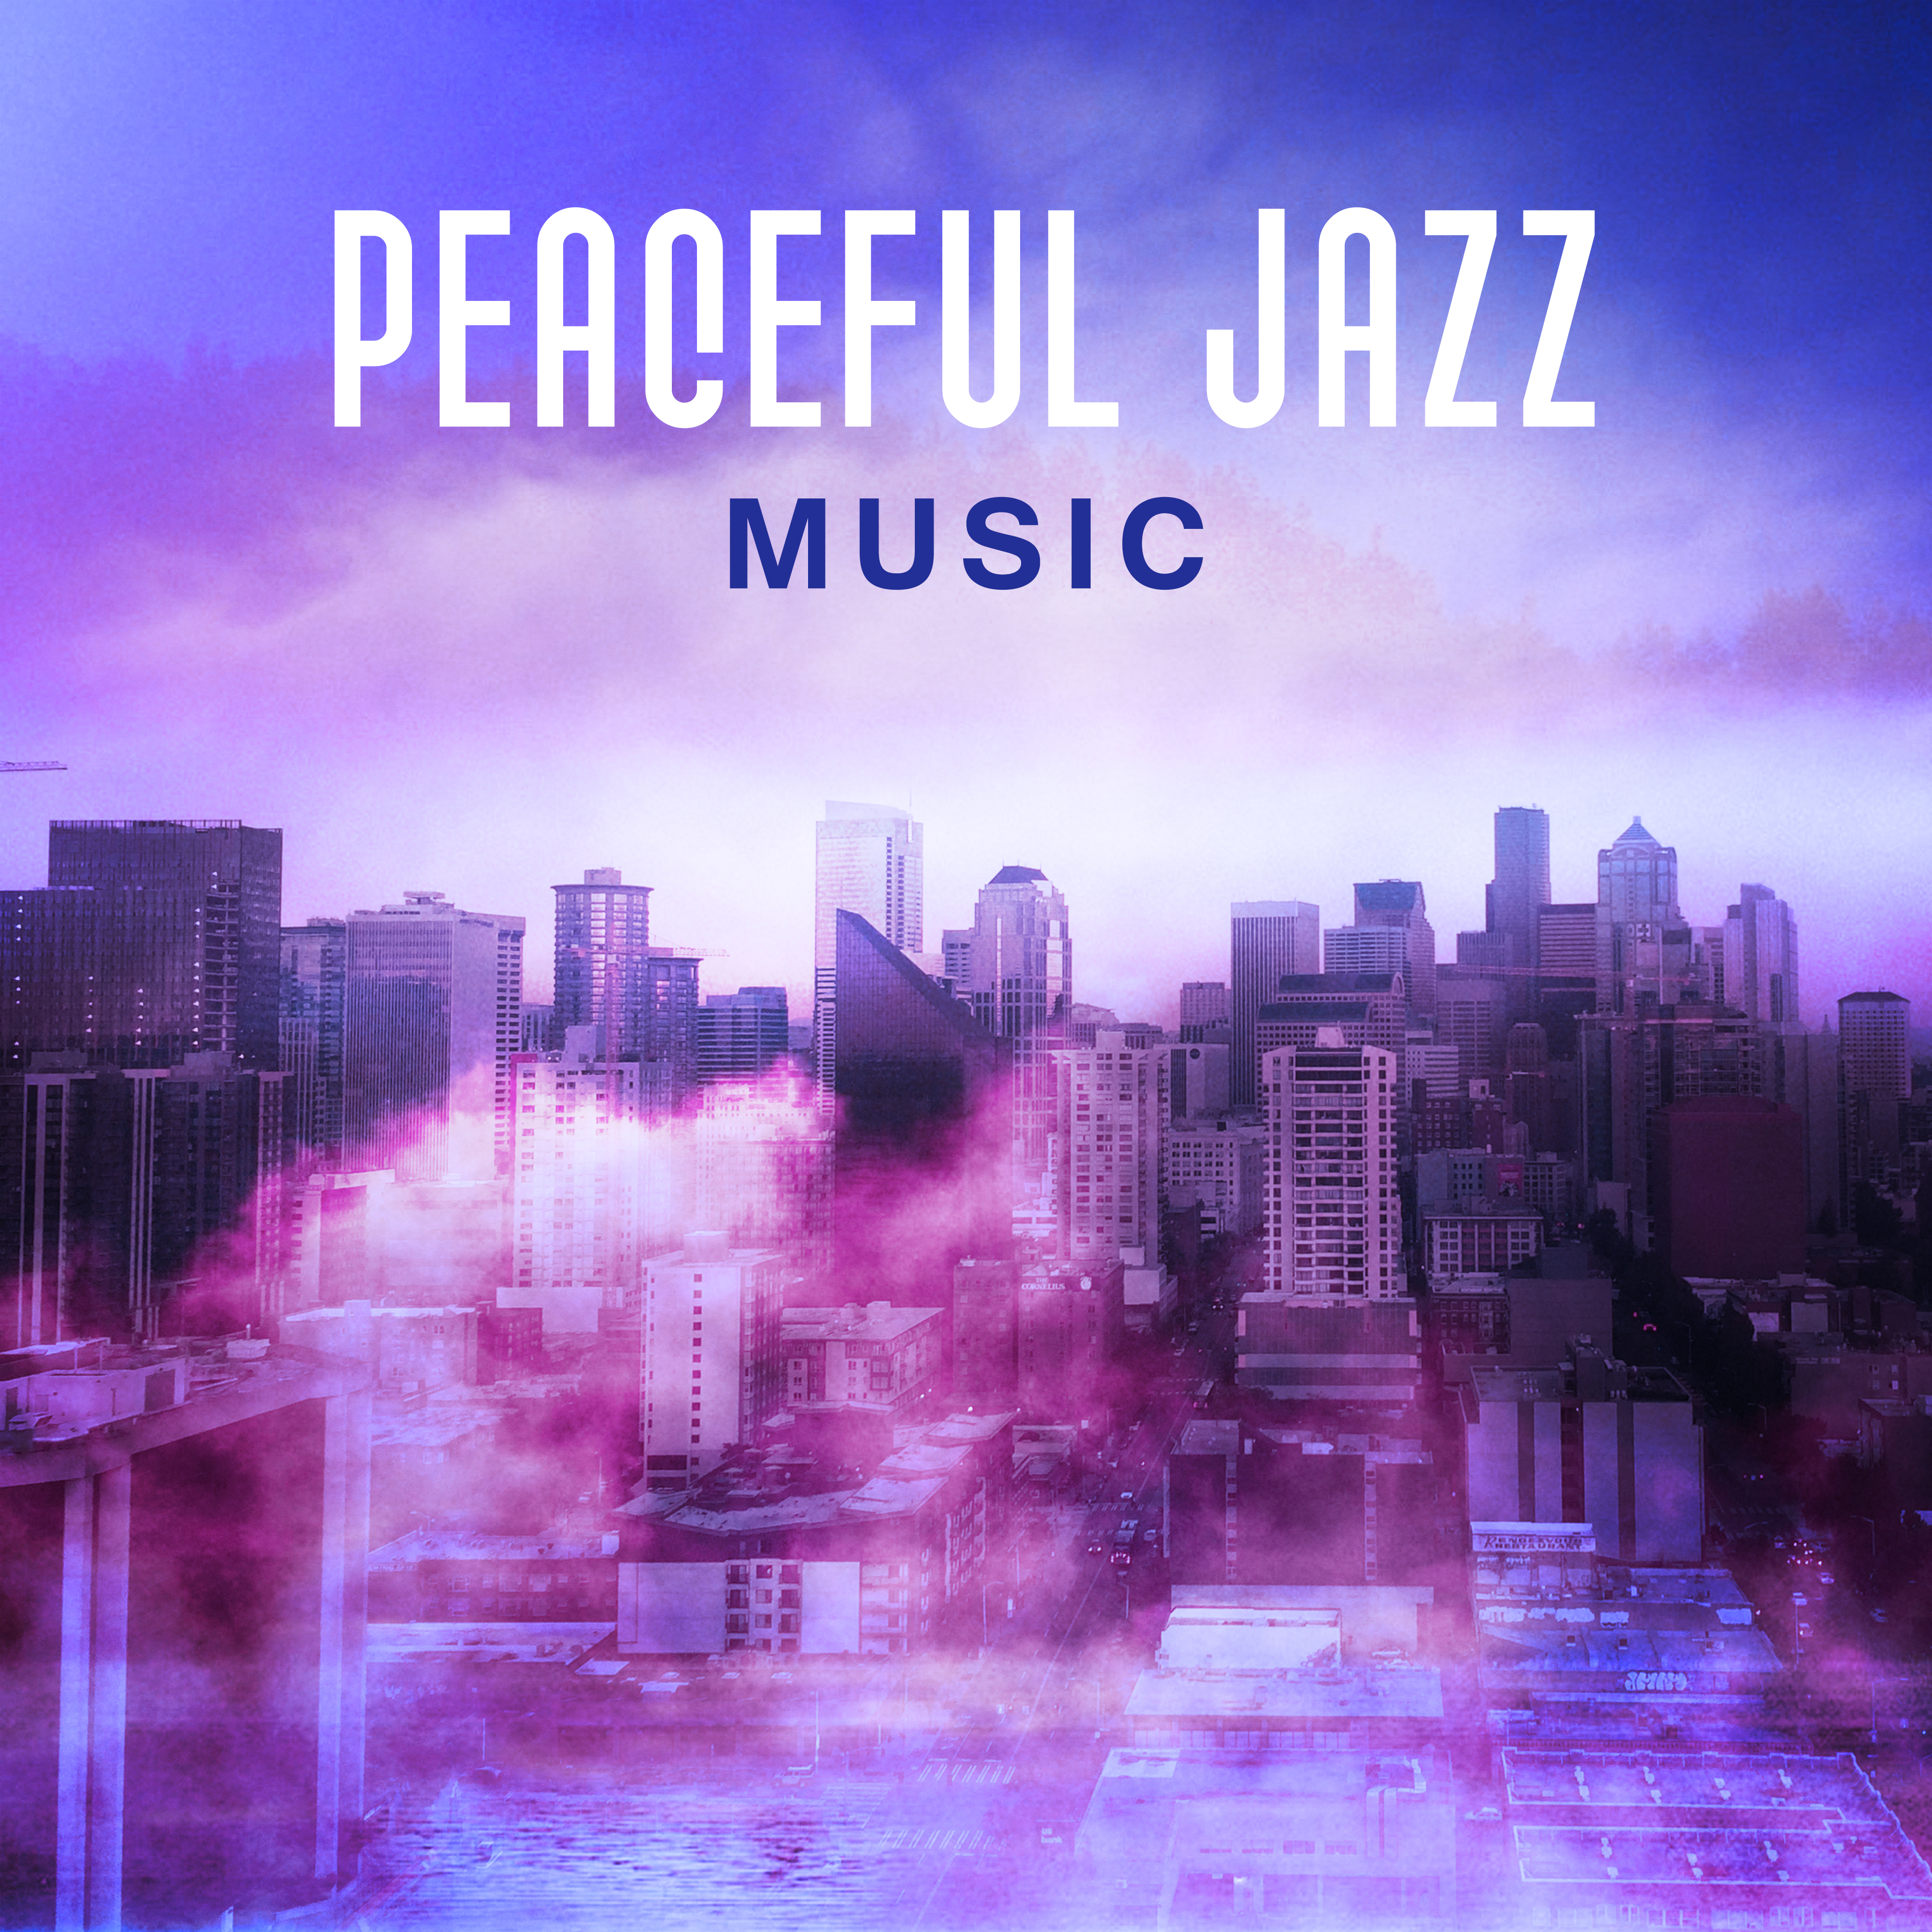 Peaceful Jazz Music  Smooth Jazz Sounds, Mind Relaxation, Stress Relief, Chilled Melodies